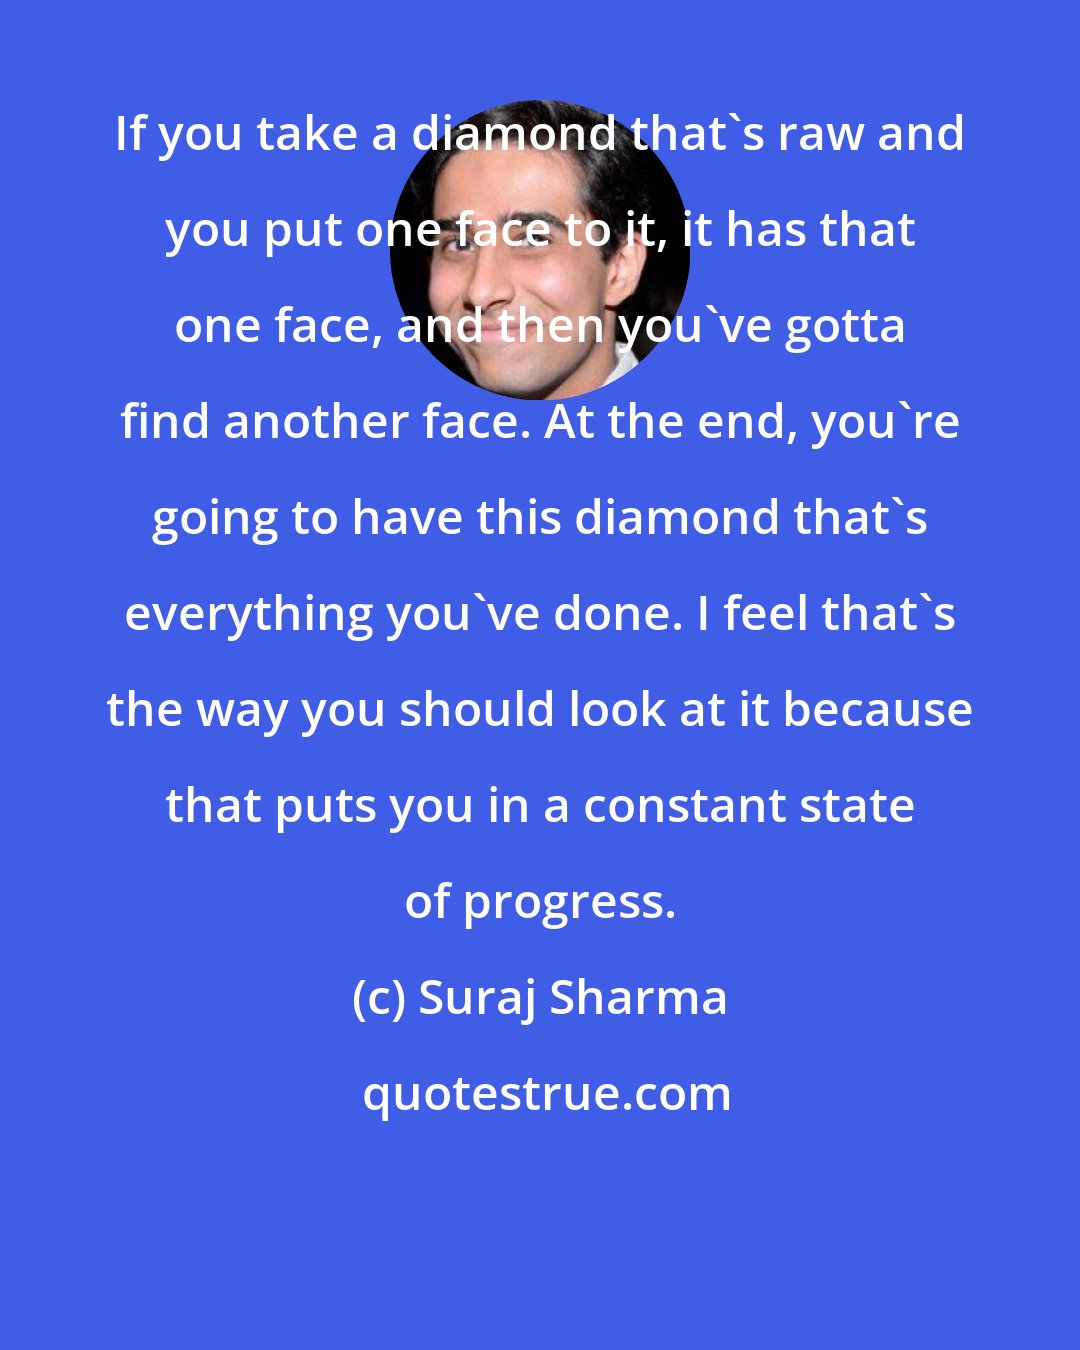 Suraj Sharma: If you take a diamond that's raw and you put one face to it, it has that one face, and then you've gotta find another face. At the end, you're going to have this diamond that's everything you've done. I feel that's the way you should look at it because that puts you in a constant state of progress.